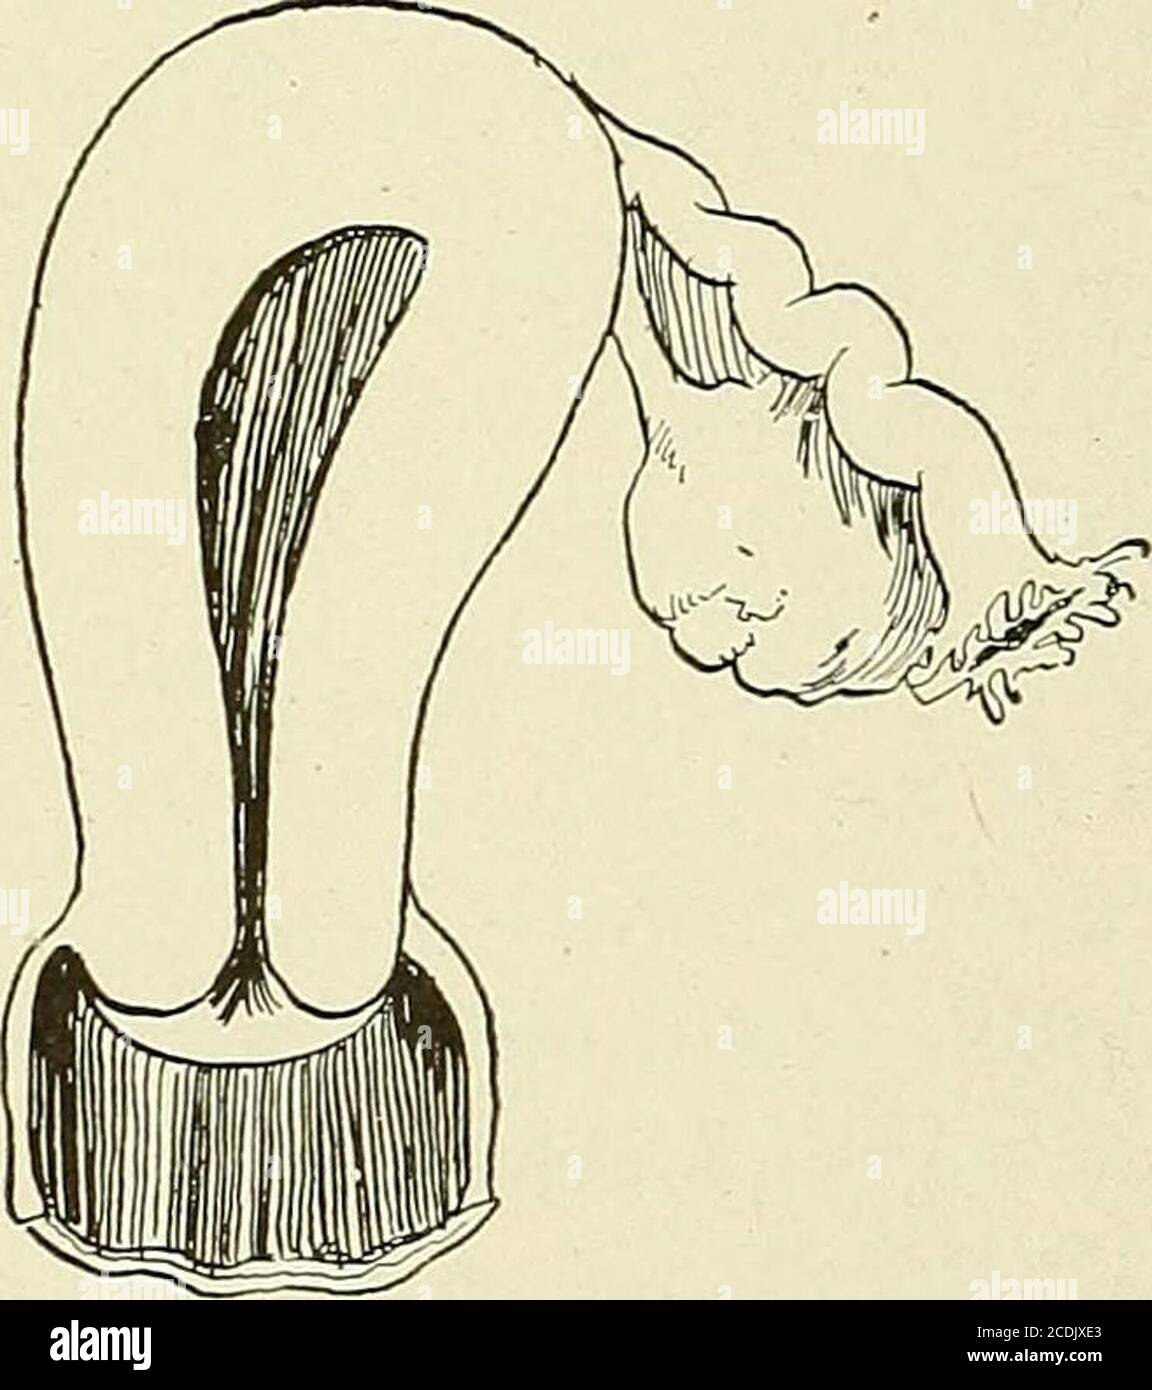 . Gynecology : . Fig. 174.—Uterus Biforis. Fig. 175.—Uterus Unicornis. The uterine cavity is single, the cervical canal The adnexa of one side are wanting. Normalis double. Normal in the ant-eater. in birds. (7) Uterus biforis. The canal of the body is normal, but a septum dividesthe cervix completely so that there is a double orifice (Fig. 174). (8) Uterus unicornis. In this form there is complete absence of one-half ofthe uterus (Fig. 175). The foregoing are the essential malformations, but they may assume variousforms as a result of unequal development in the two sides. If both halves of ad Stock Photo